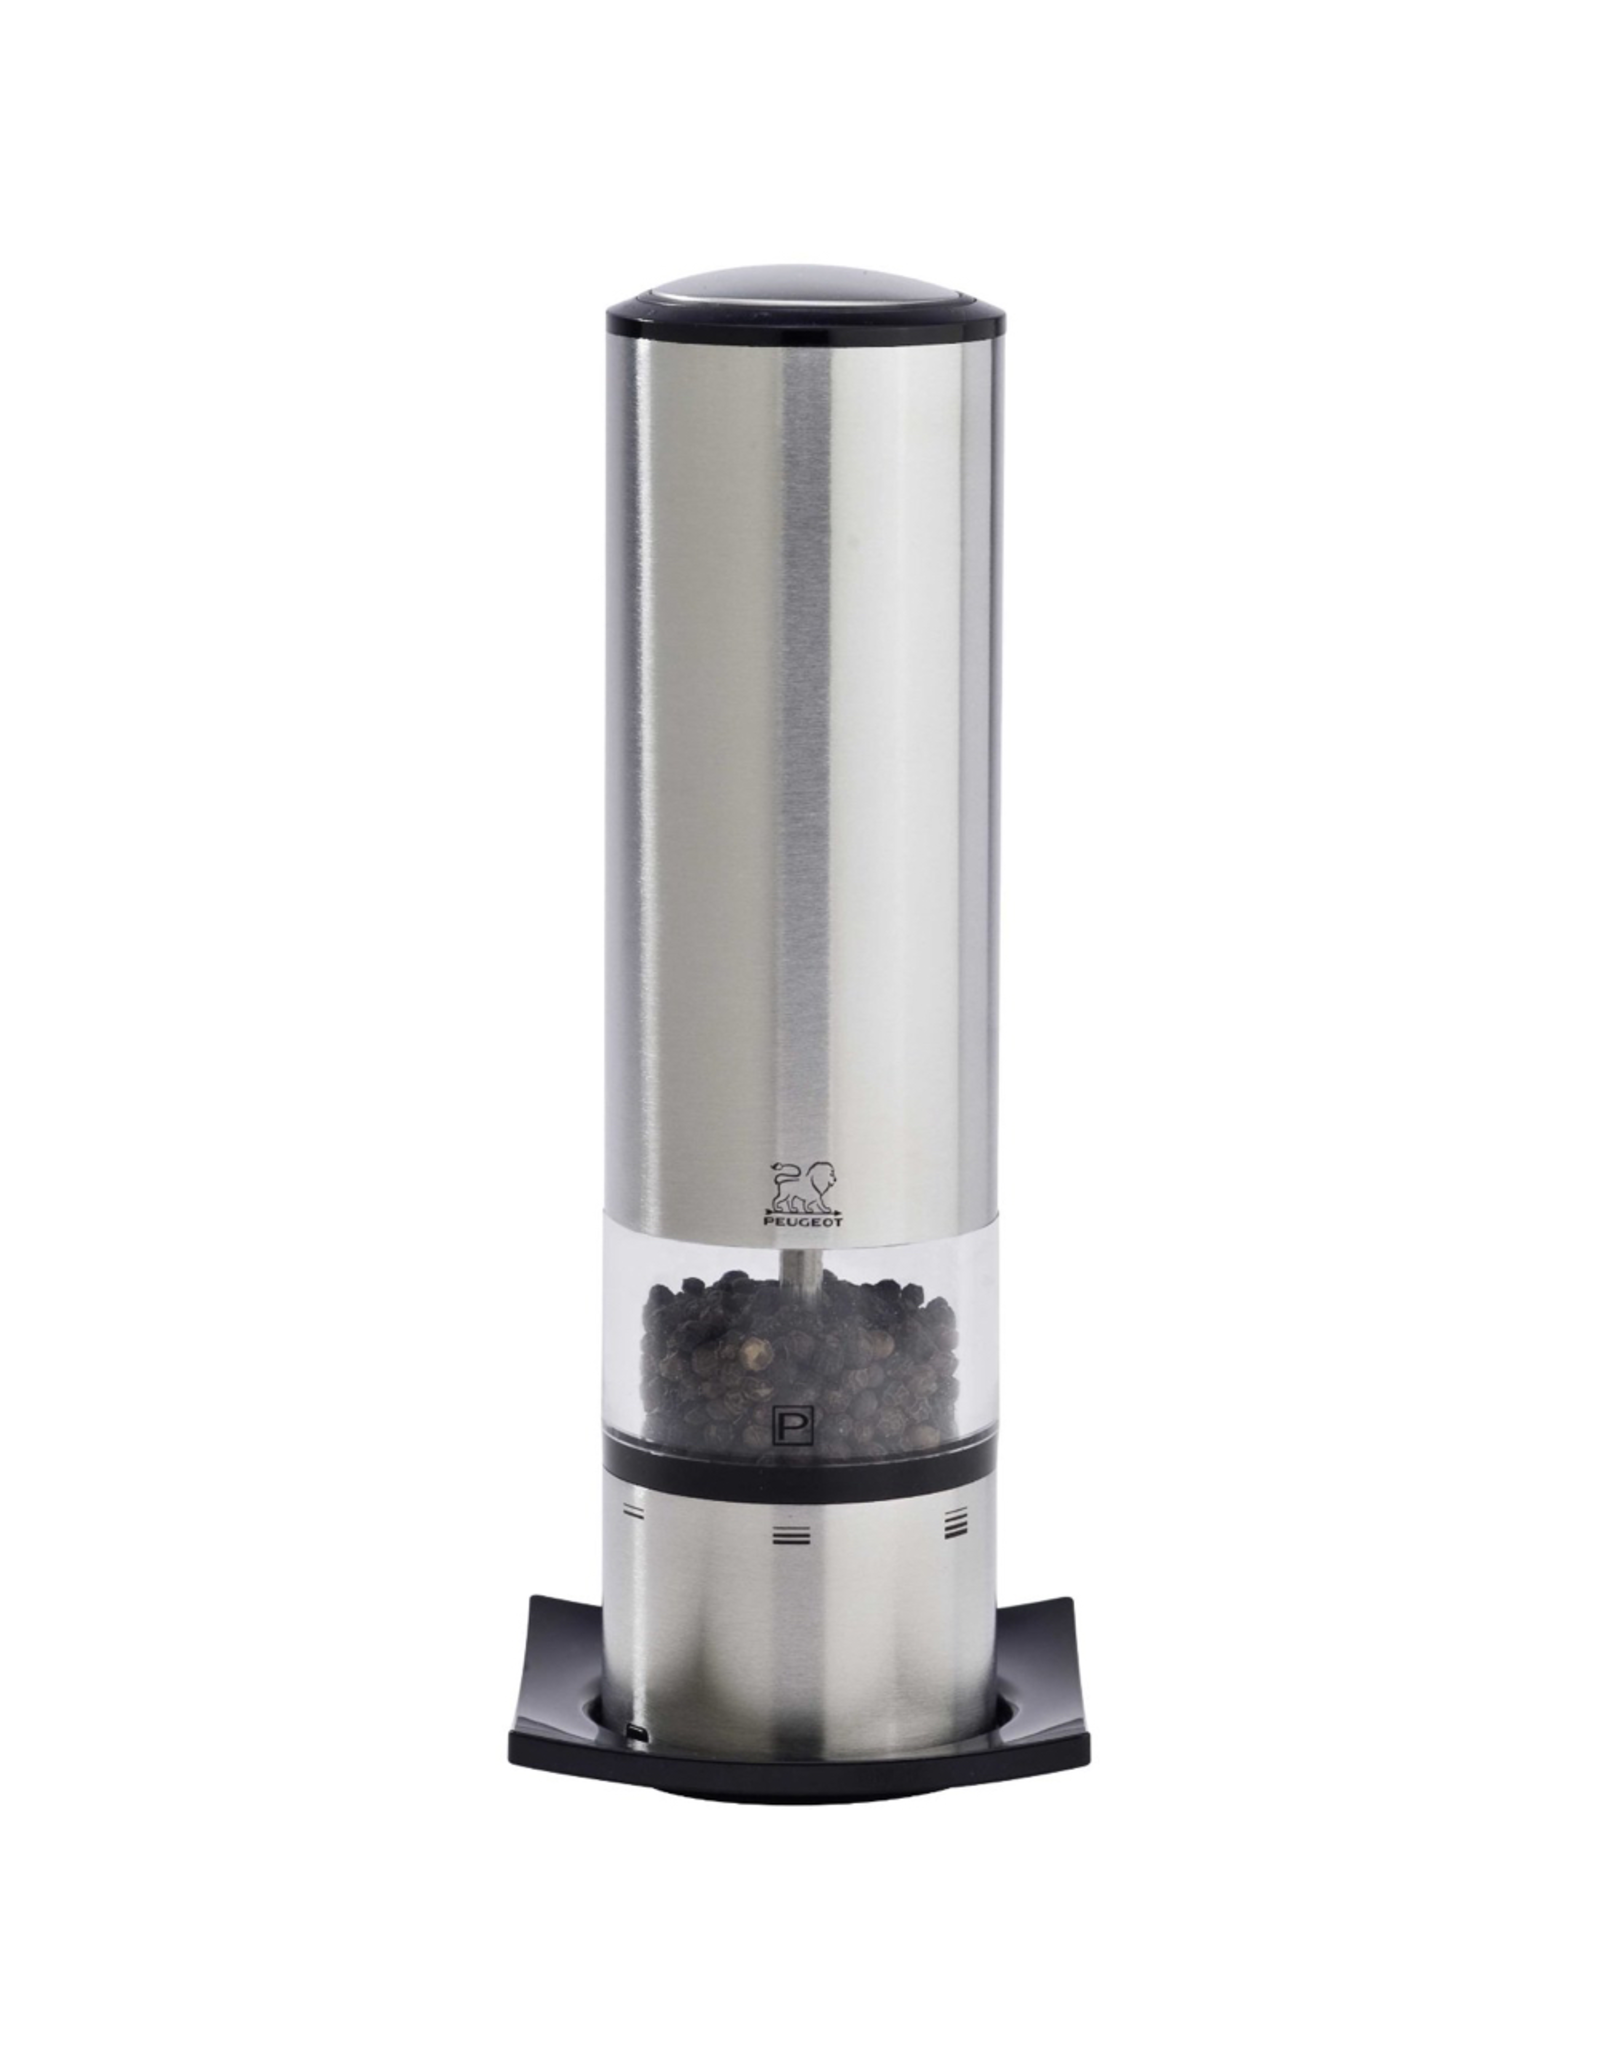 Peugeot PSP Saveurs Elis Sense Electric Pepper Mill Touch Operated